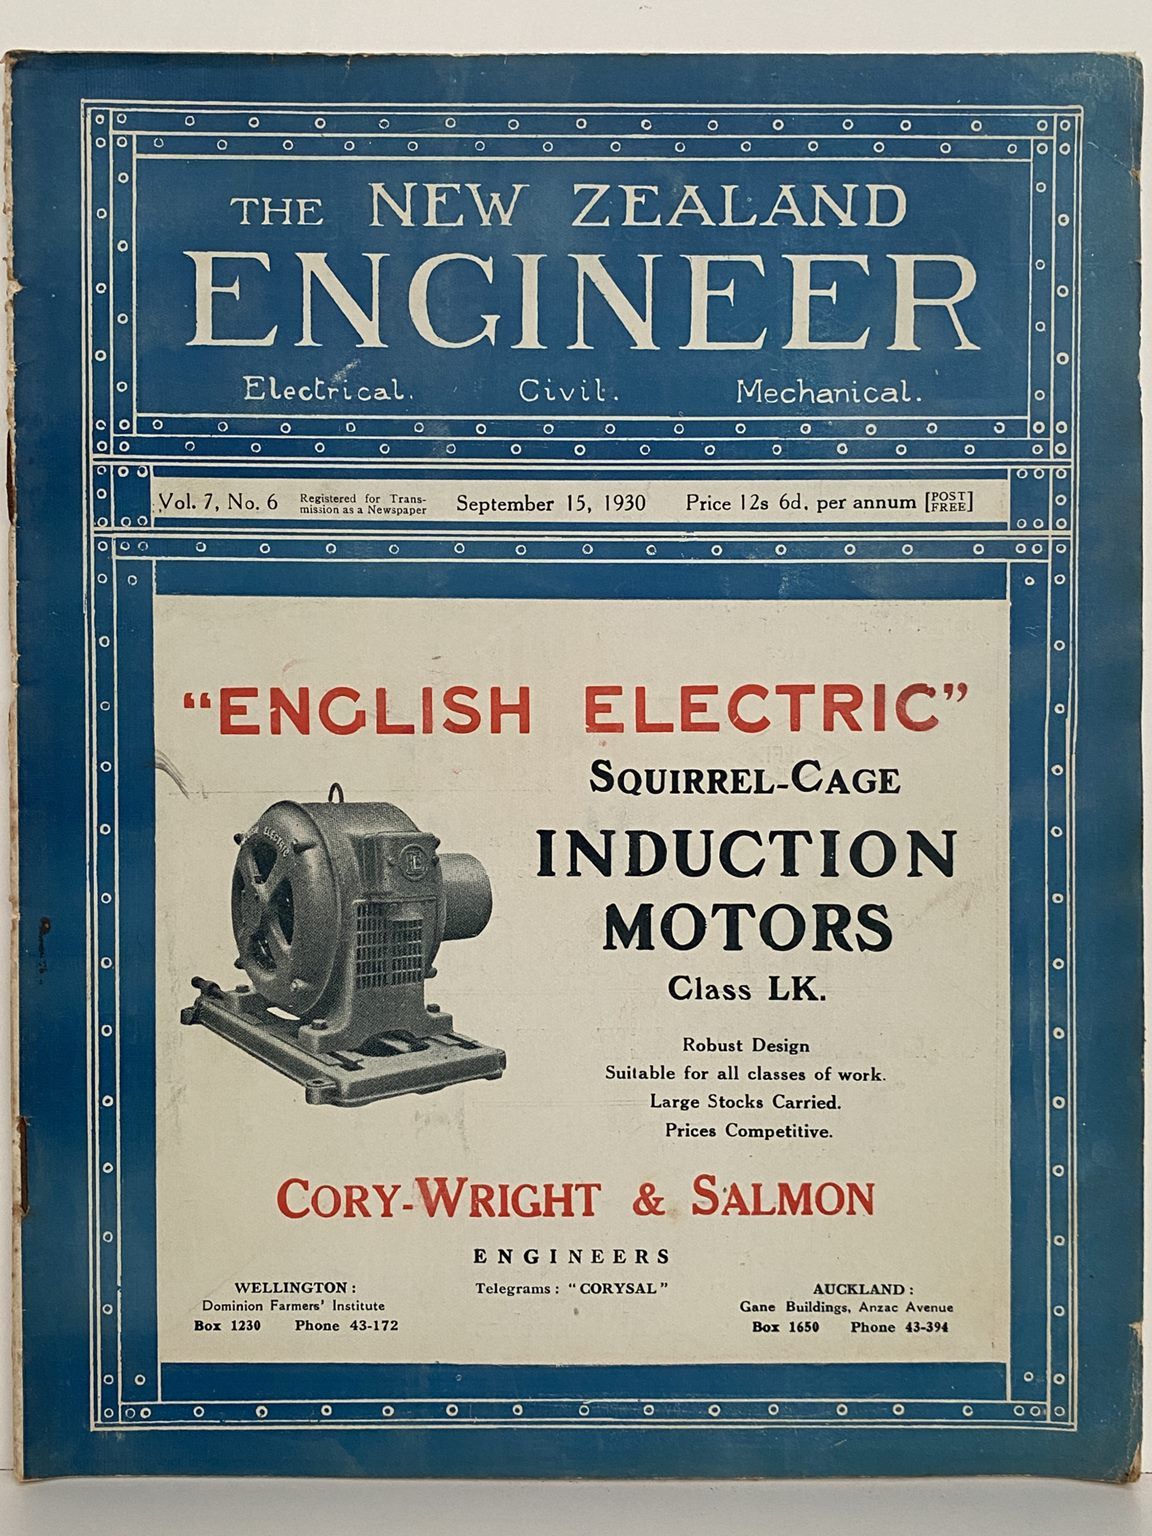 OLD MAGAZINE: The New Zealand Engineer Vol. 7, No. 6 - 15 September 1930